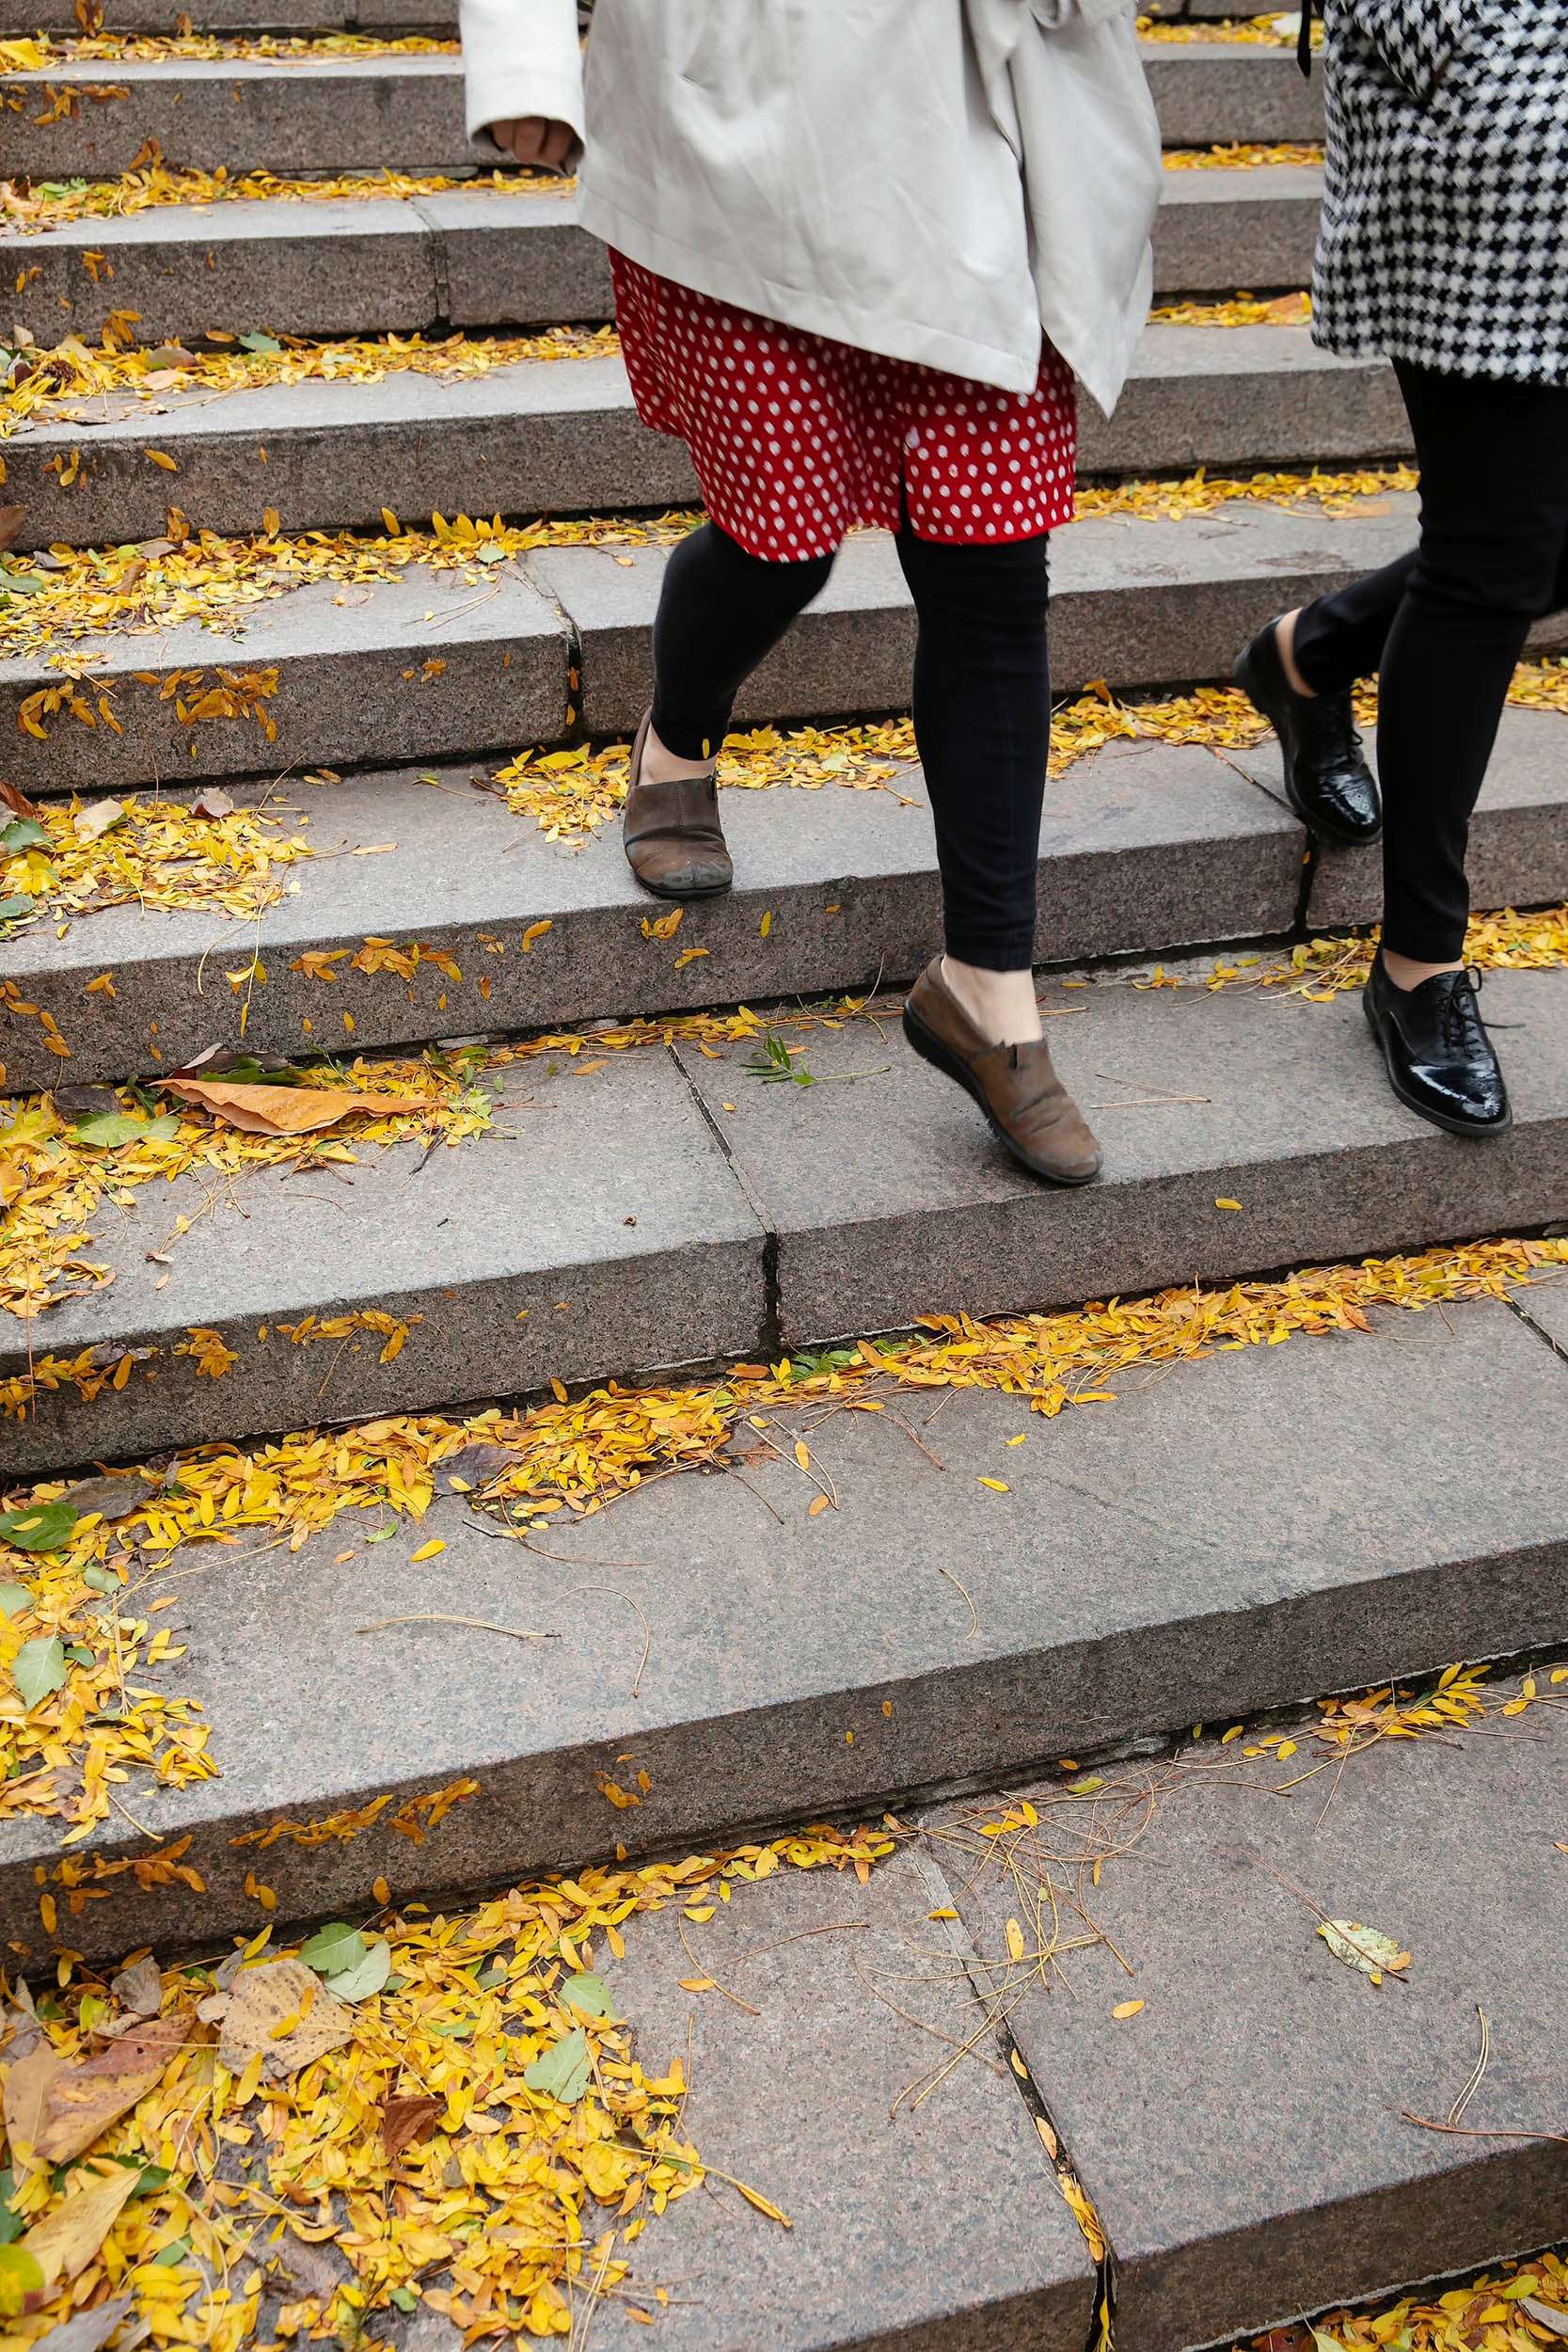 Students in polka dots and houndstooth descend the leaf-covered steps beside Houghton Library.